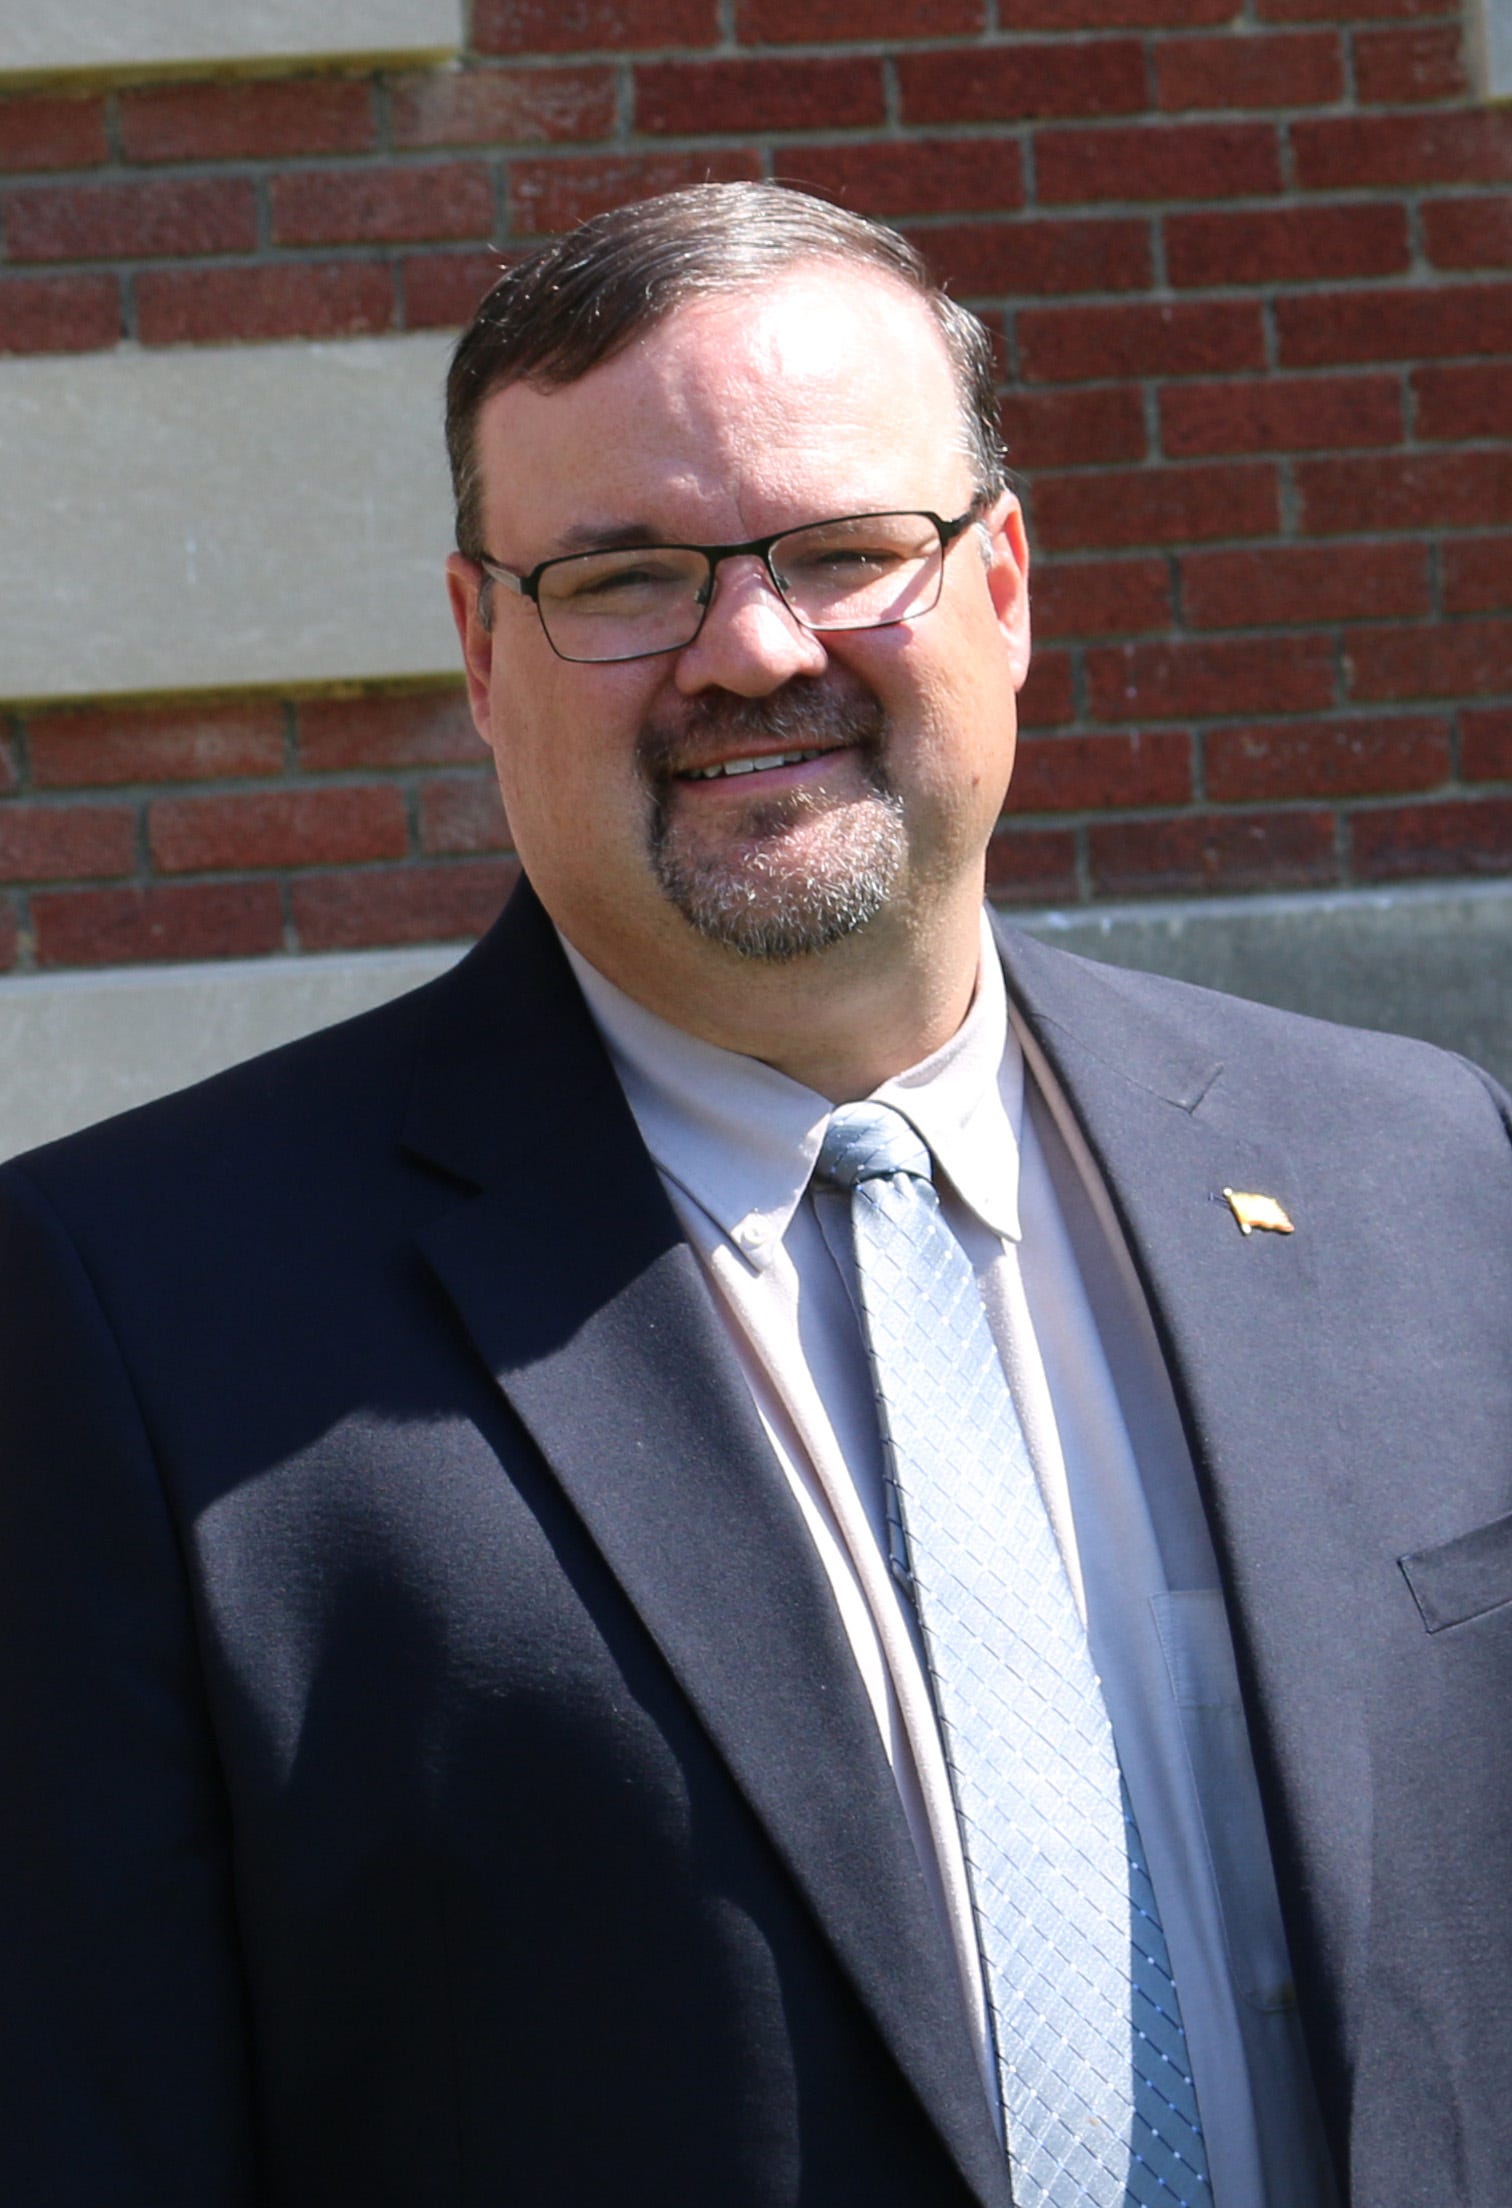 Chad Brown, Licking County Health Commissioner